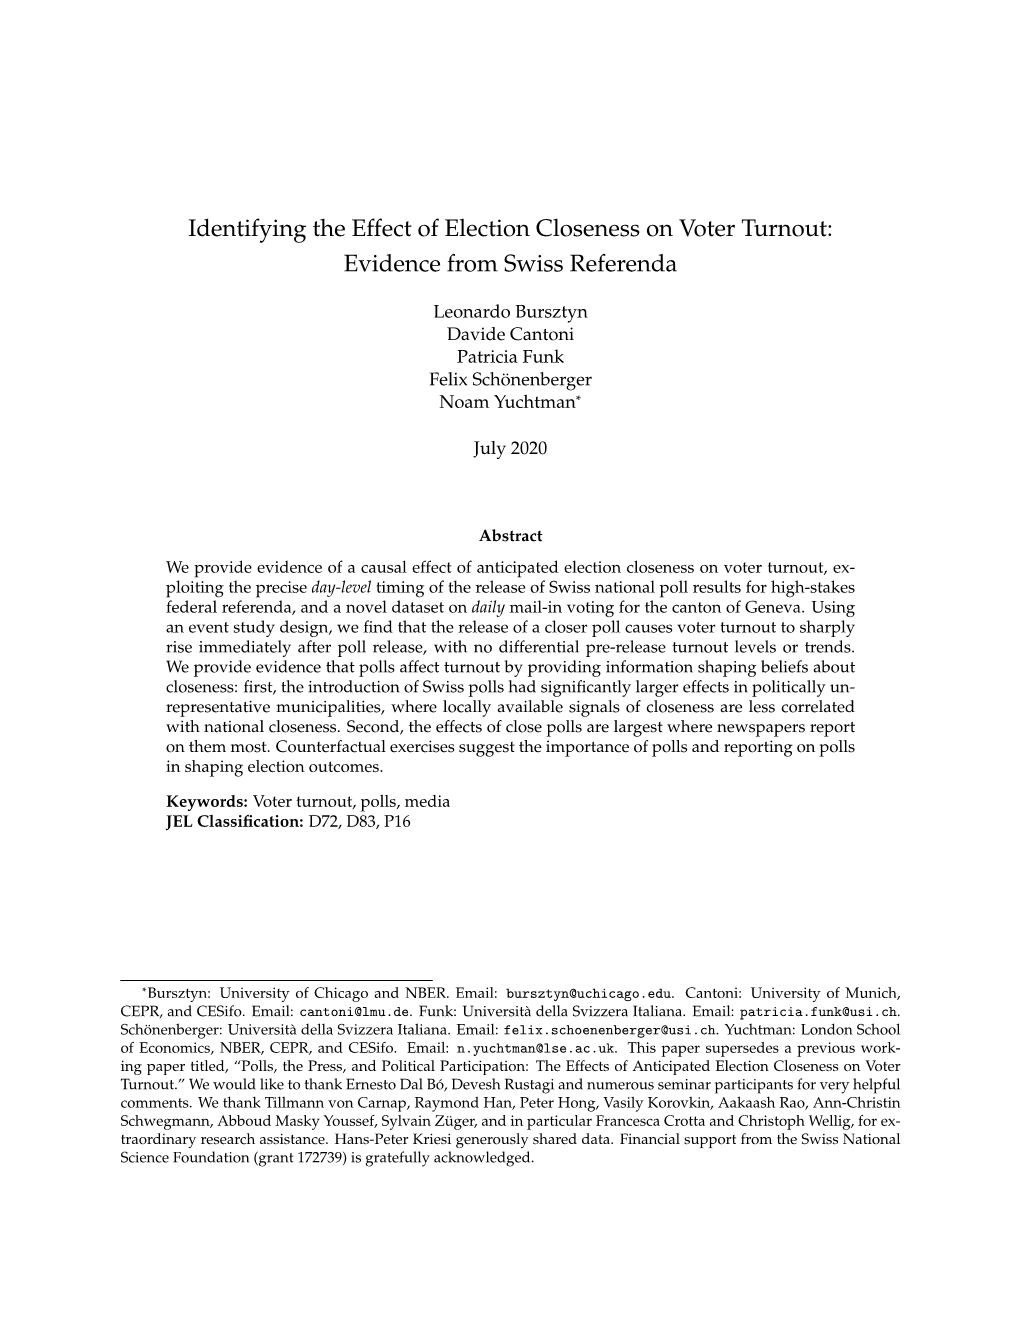 Identifying the Effect of Election Closeness on Voter Turnout: Evidence from Swiss Referenda